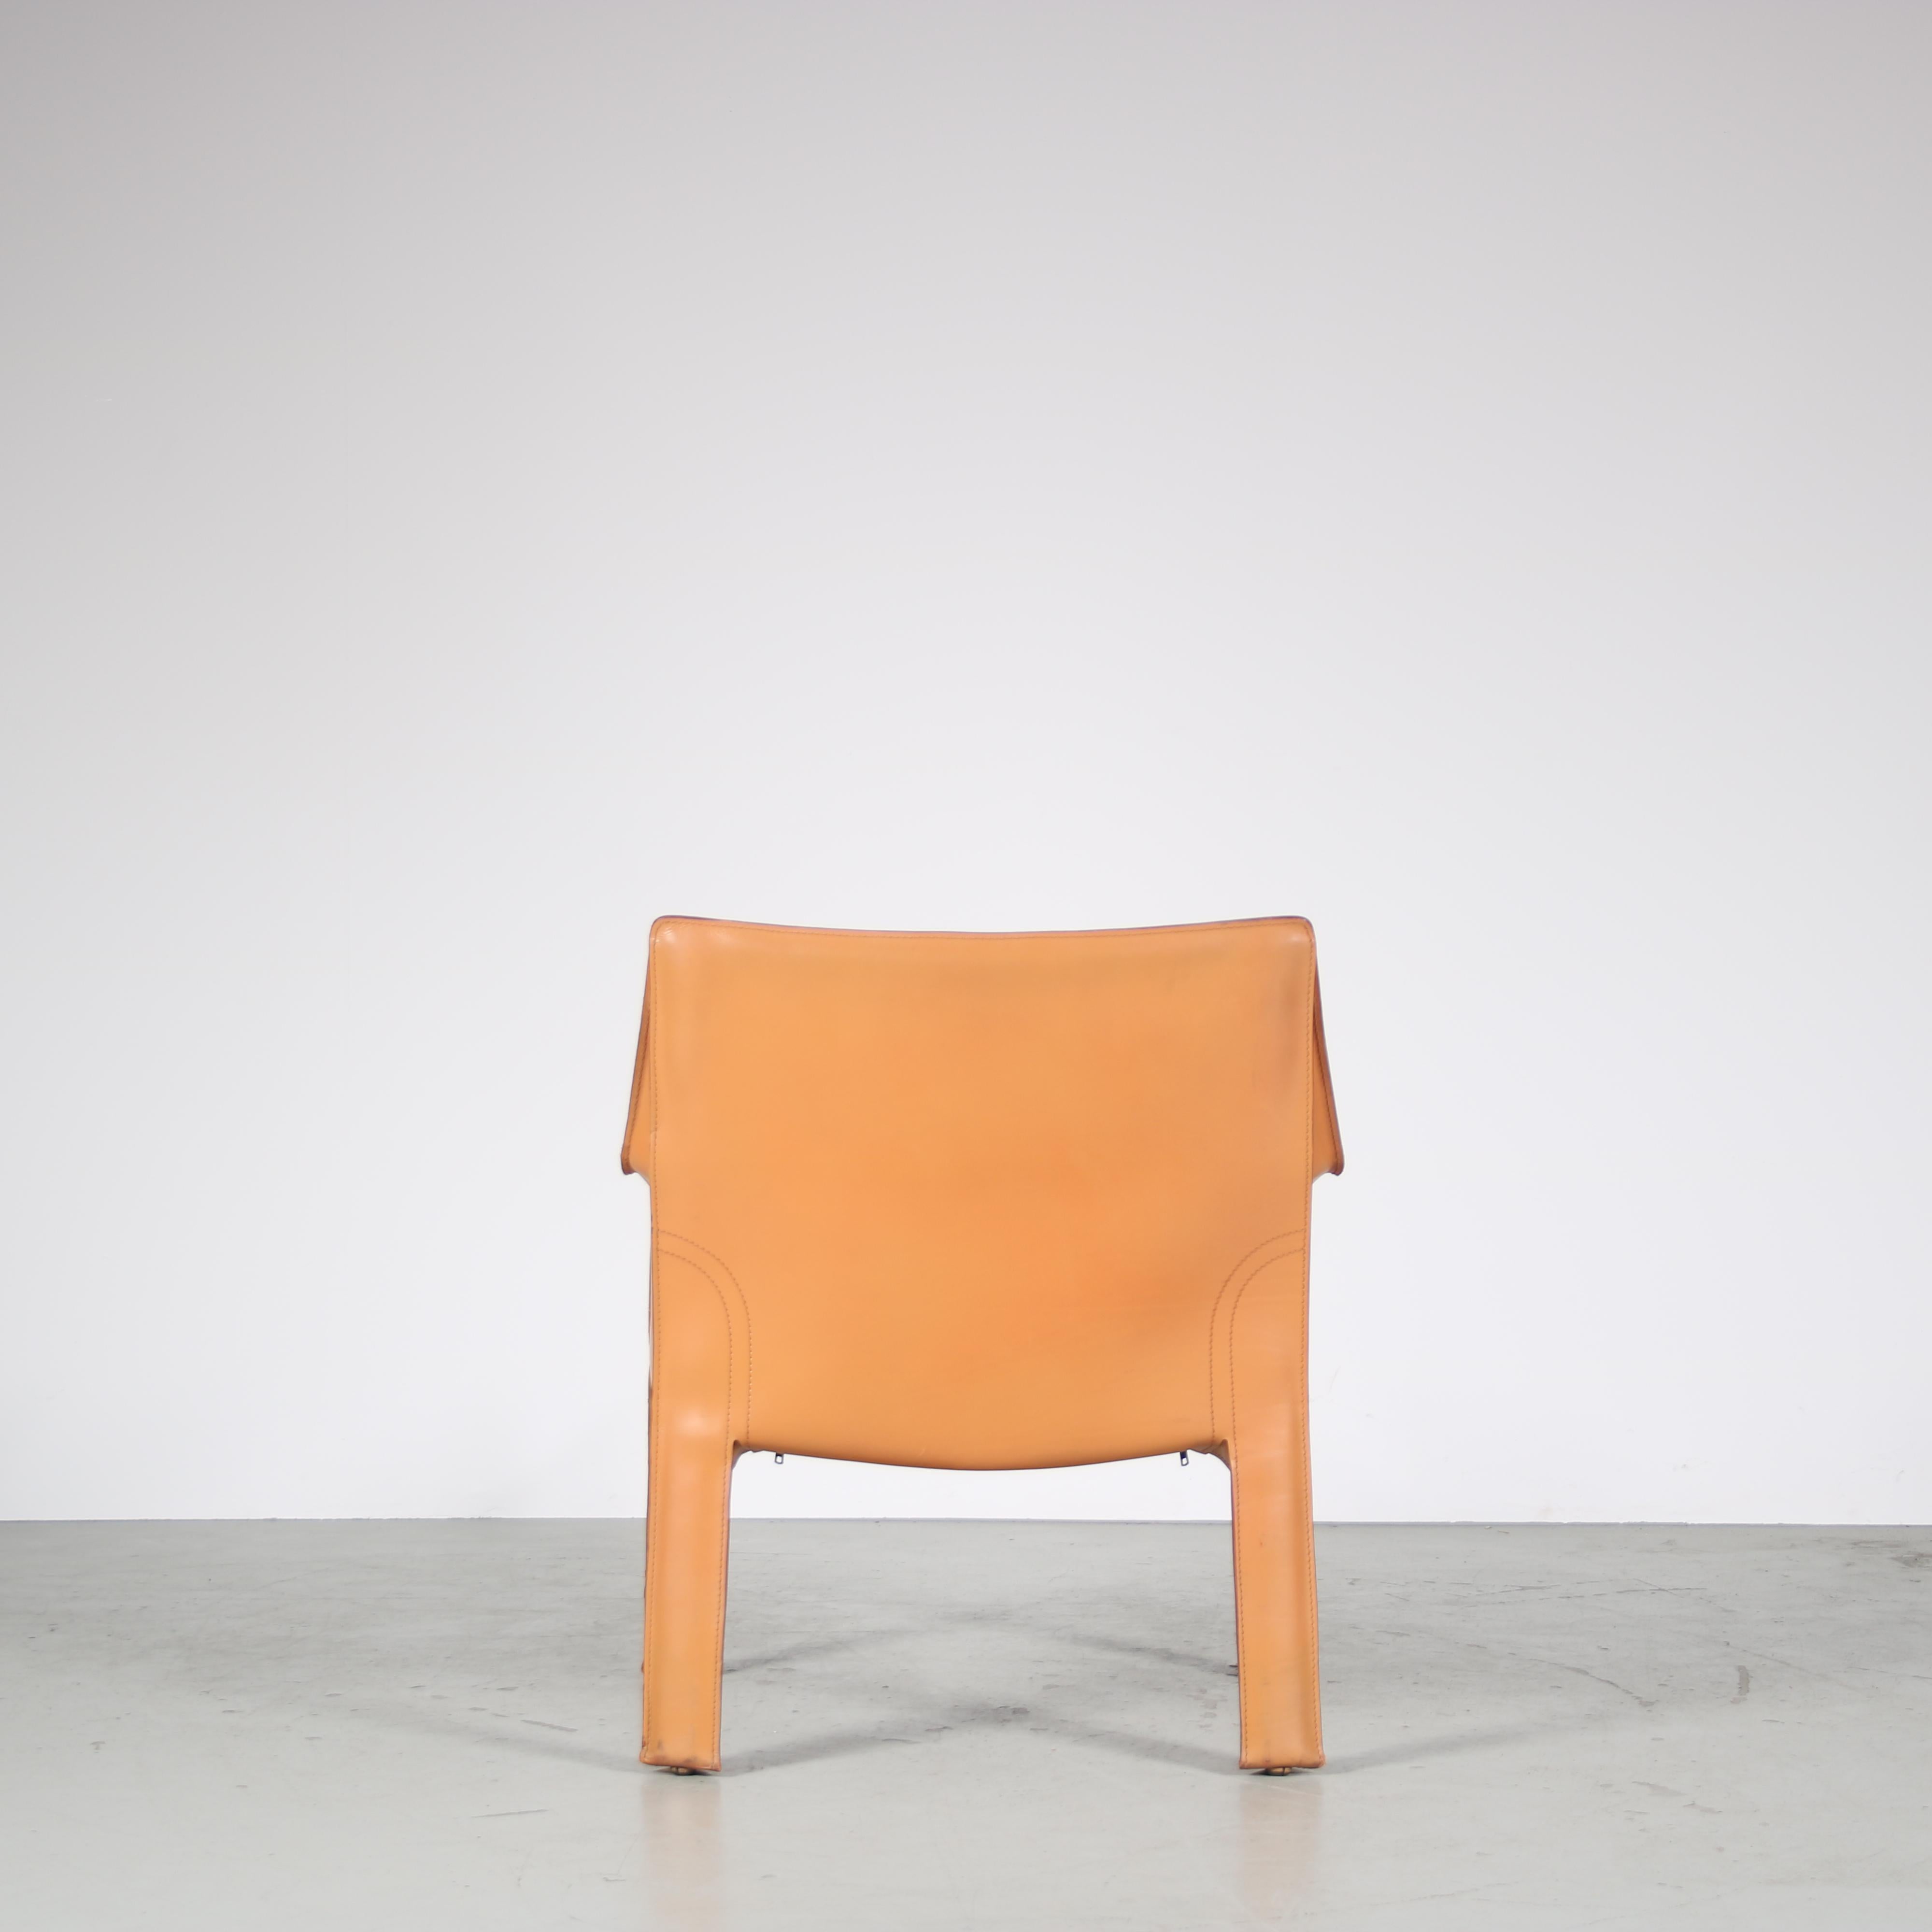 Leather Mario Bellini “Cab 414” Chair for Cassina, Italy 1980